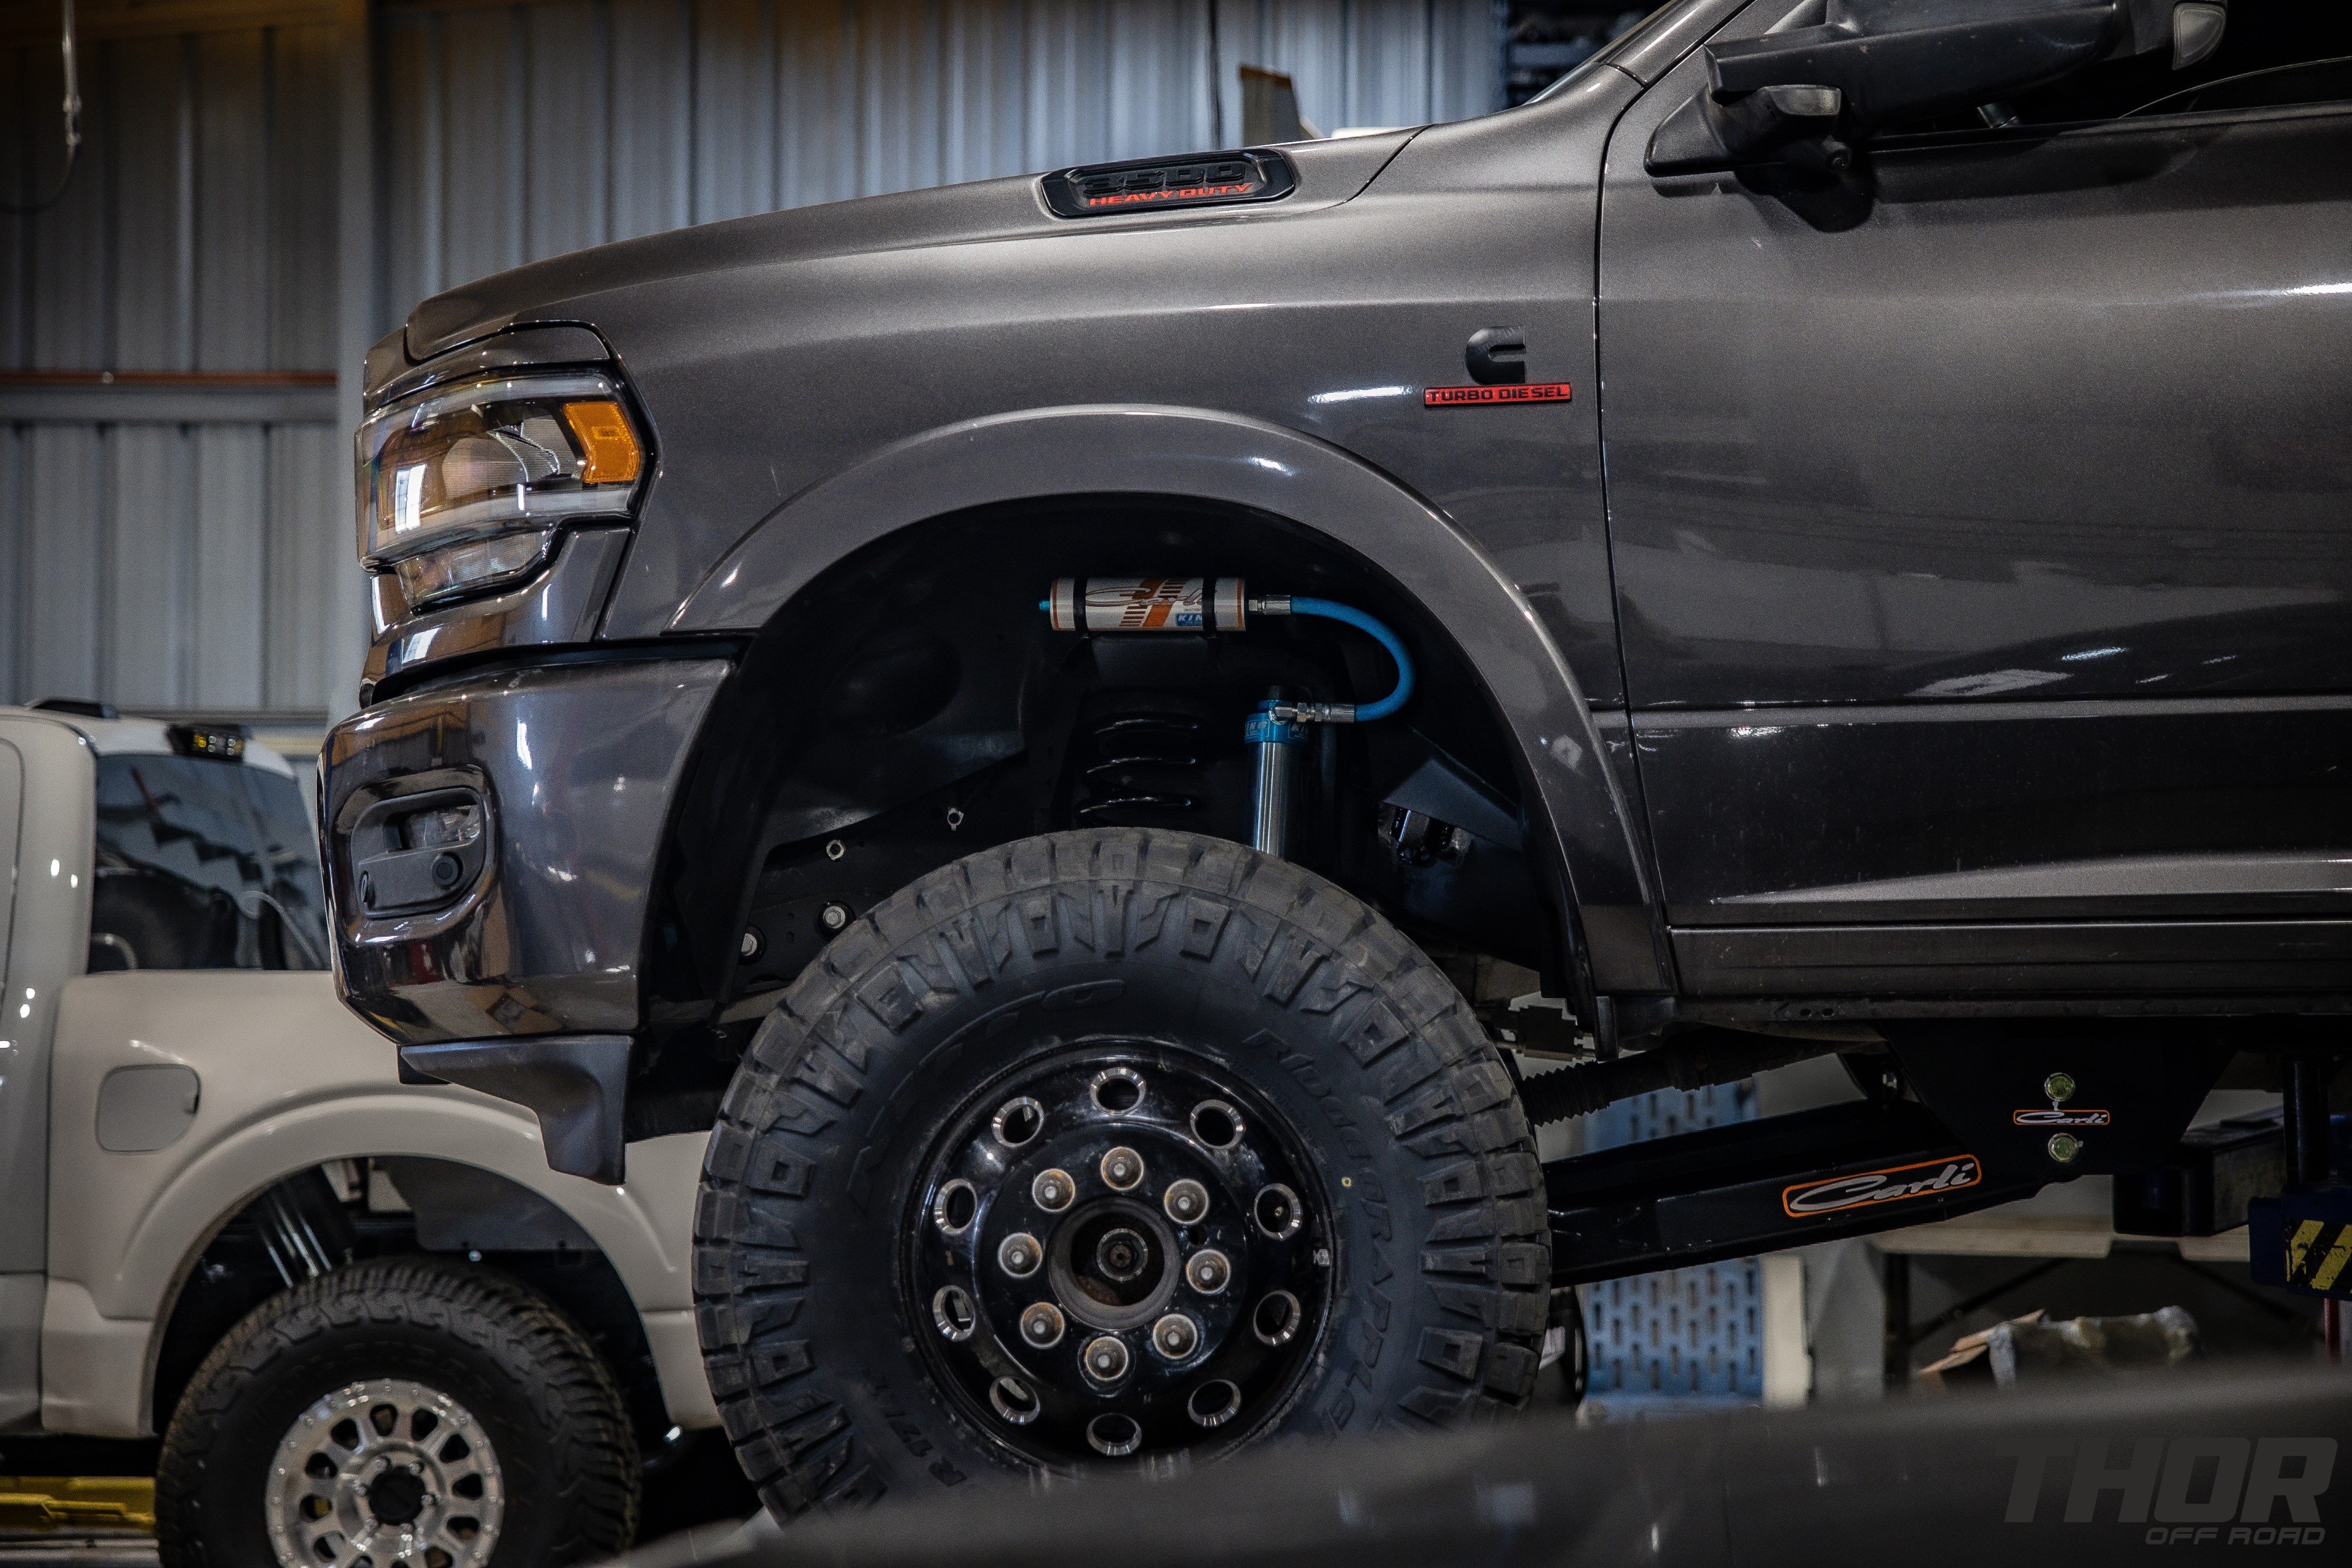 2022 RAM 3500 in Grey with Carli 3" Pintop Suspension System, Carli Fabricated Radius Arms, Carli Low Mount Steering Stabilizer, Carli High Mount Steering Stabilizer, Carli Ball Joints, Carli Add-a-Pack, Air Lift 5000 Load Lifter Kit, 37x12.50R17 Nitto Ridge Grappler Tires